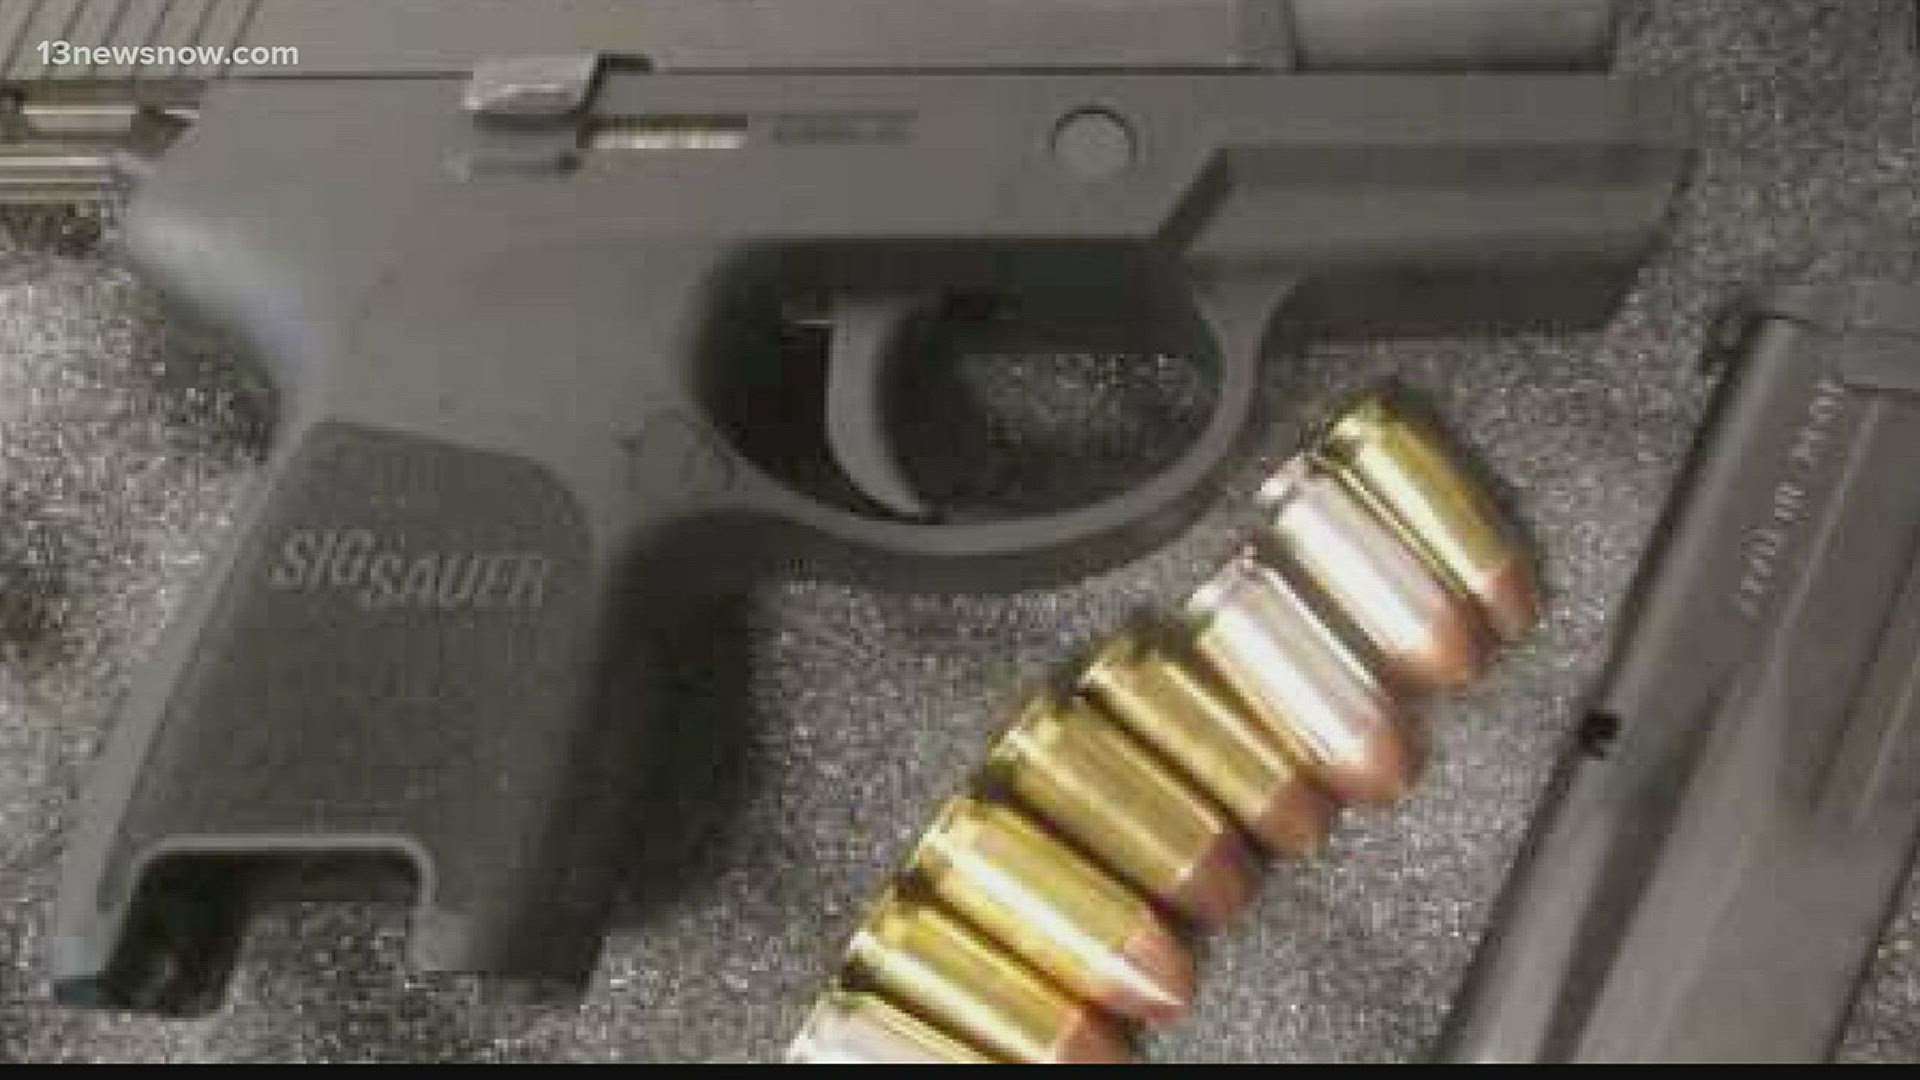 TSA officials are reminding airline passengers to not bring loaded guns through airport security. 13News Now Elise Brown has more.